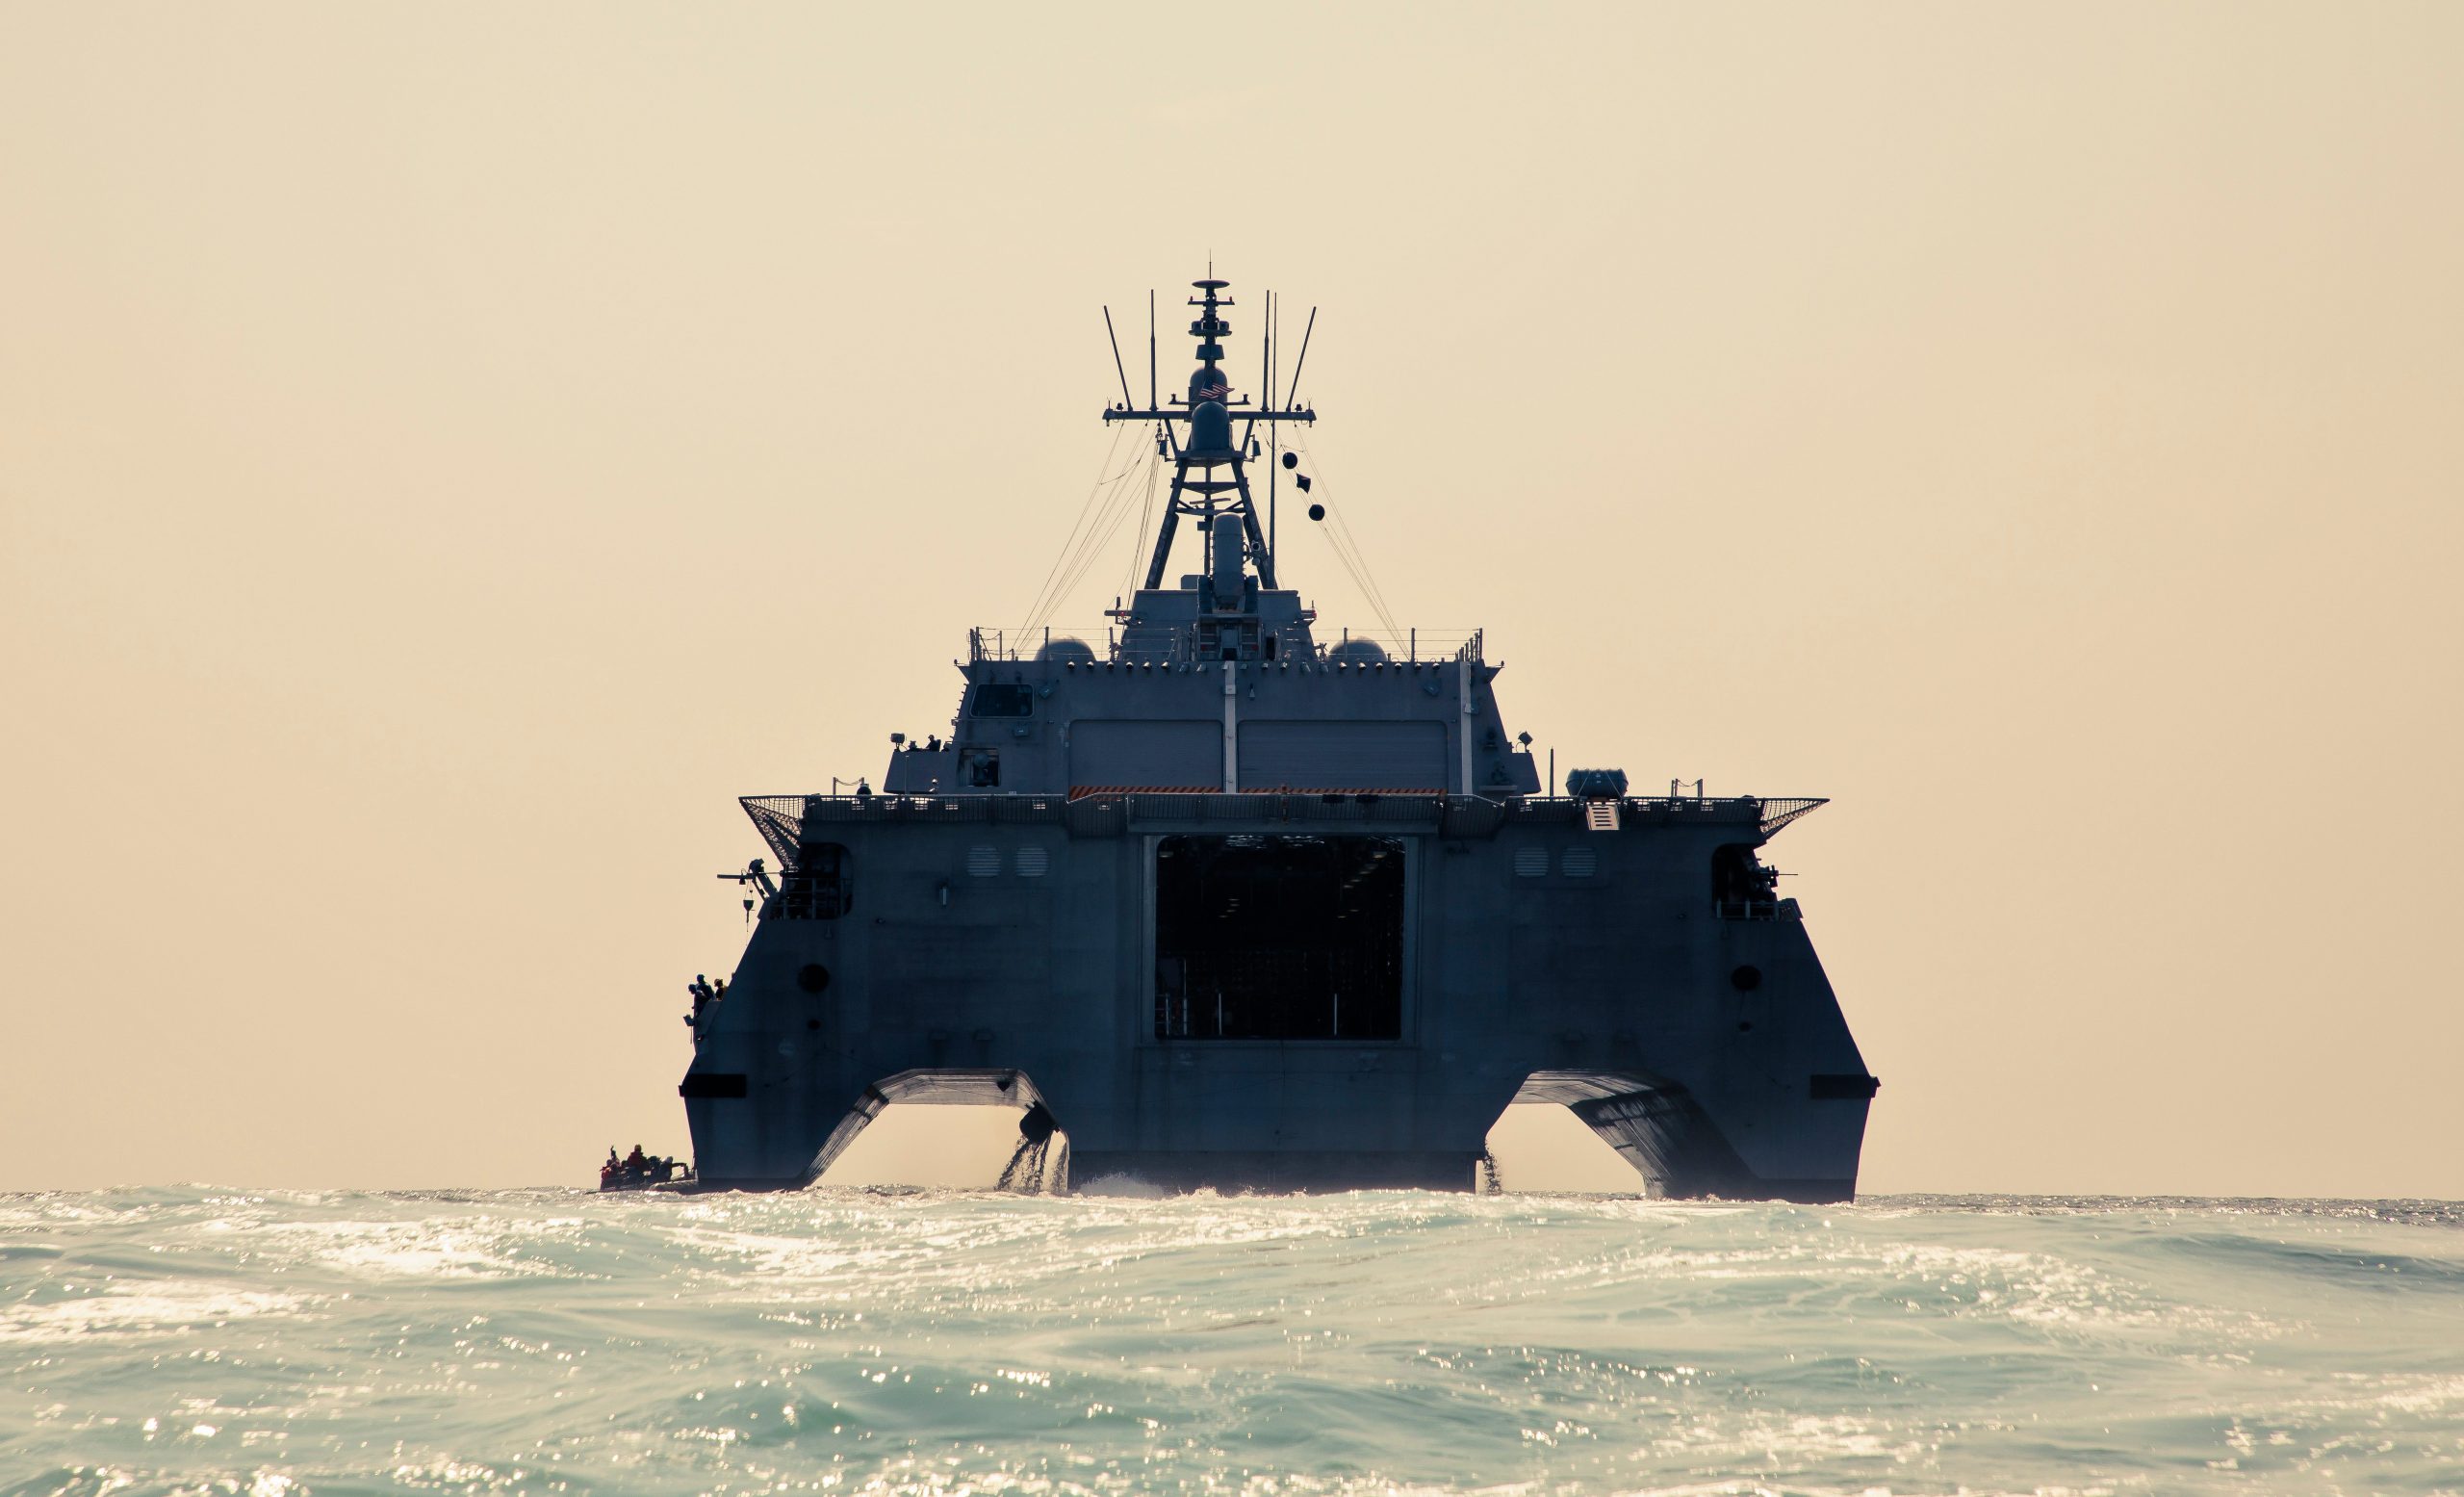 The rear of a navy ship as seen out in the water